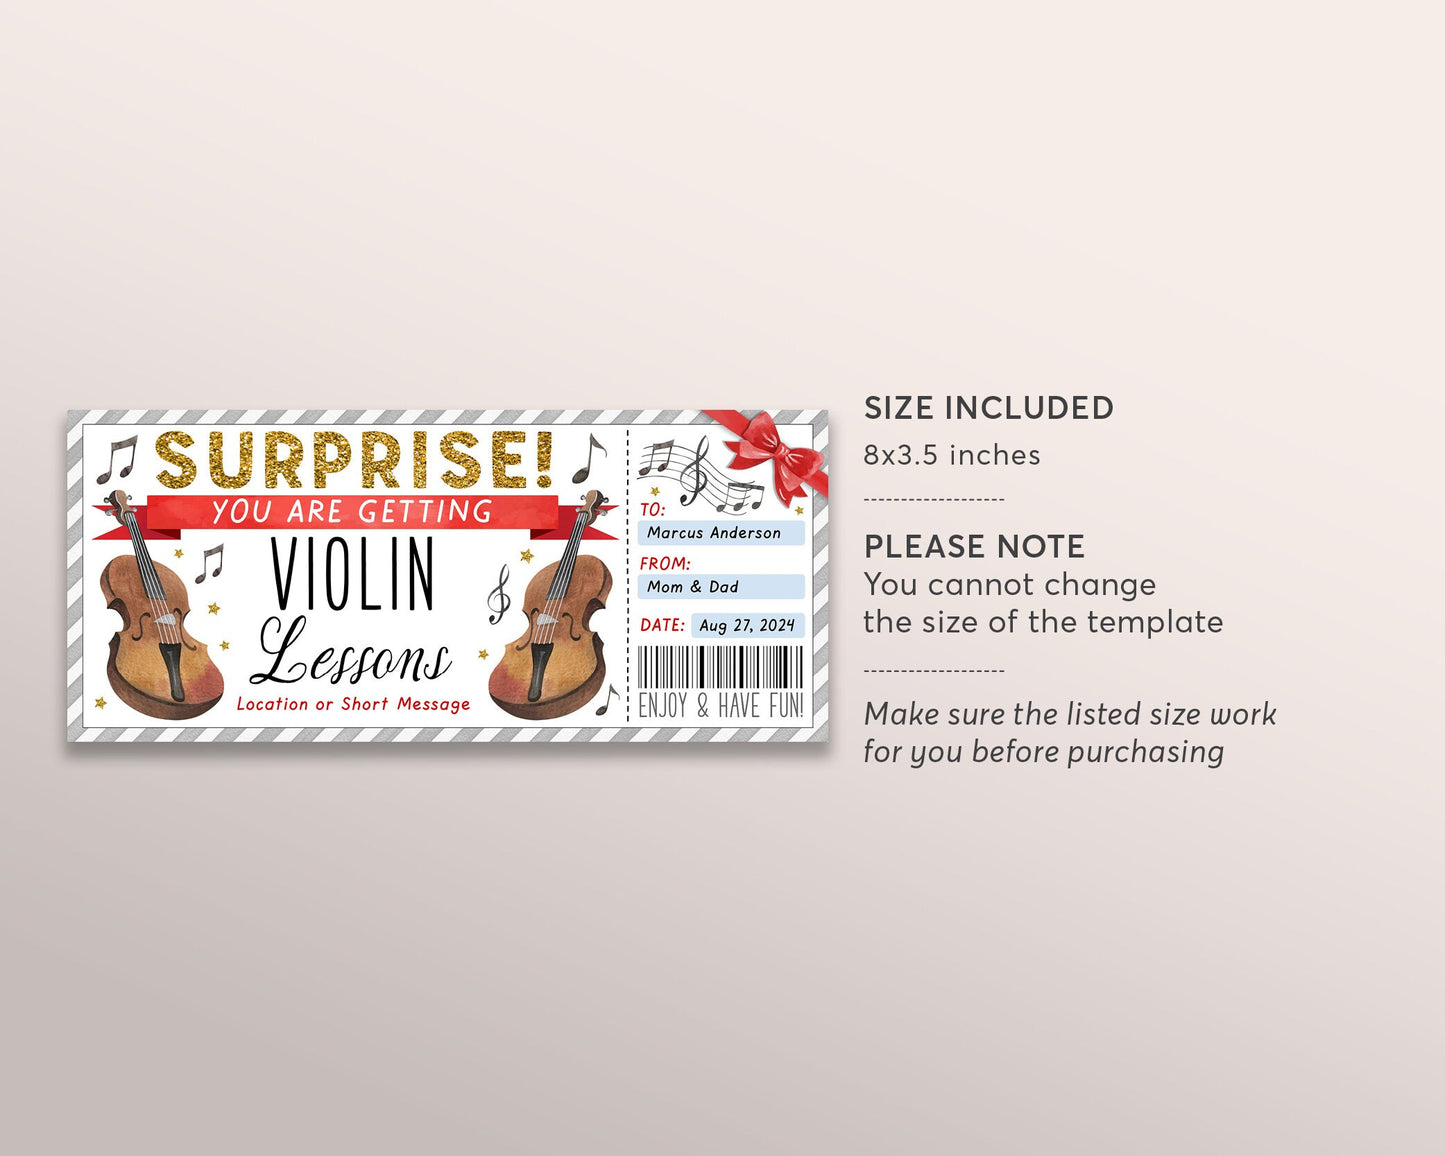 Violin Lessons Gift Certificate Editable Template, Surprise Music Violin Class Masterclass Gift Voucher Gift Reveal Coupon, Any Occasion